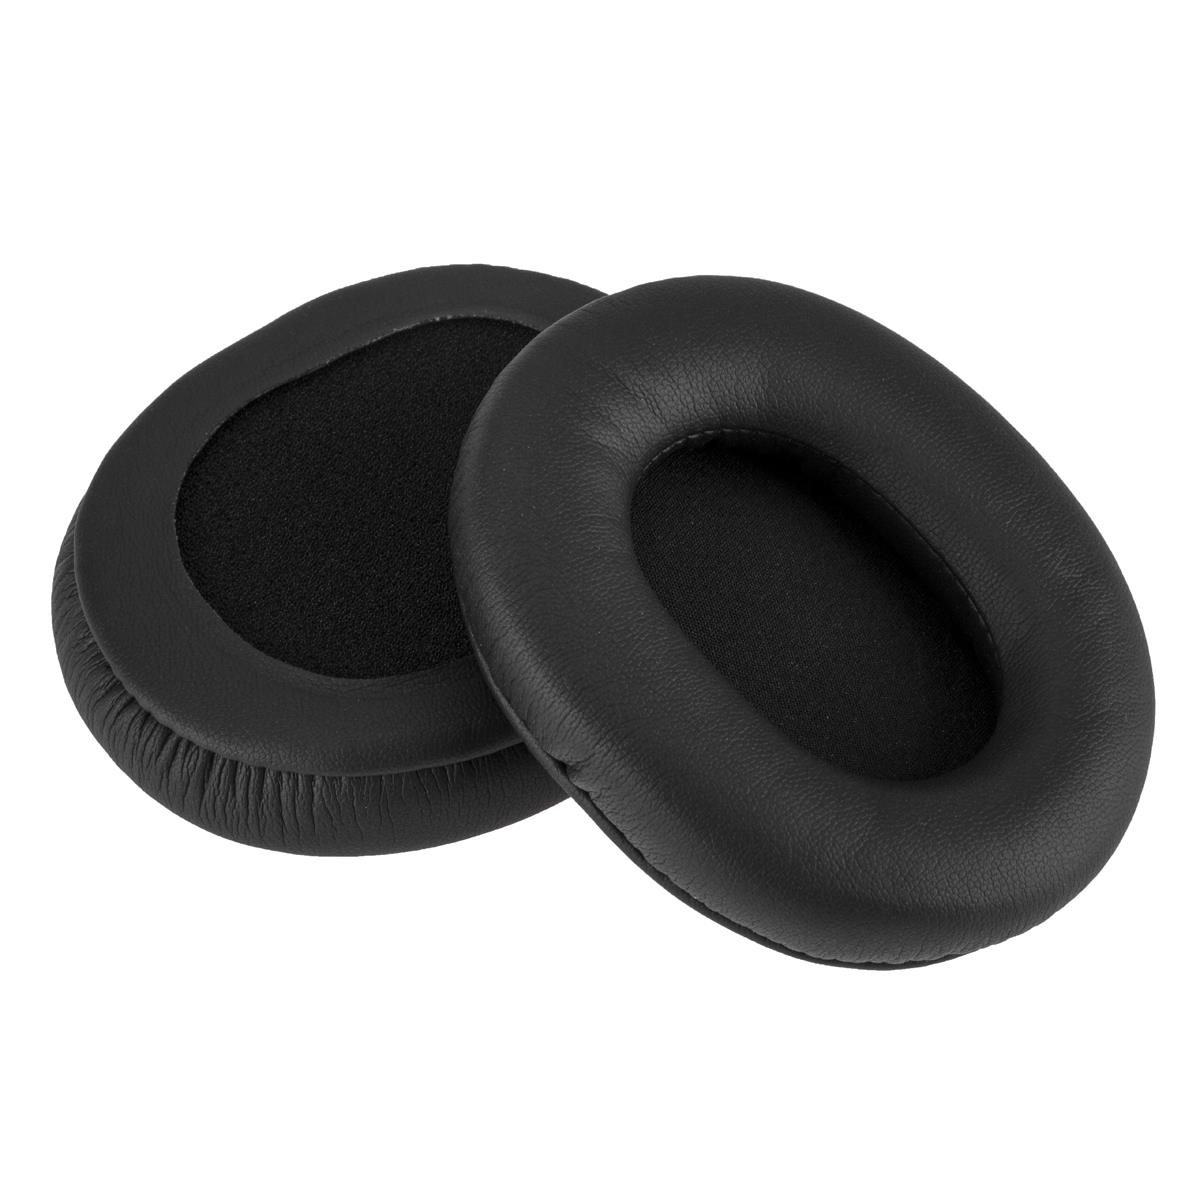 

H&A High Frequency Leather Earpads for Audio Technica ATH-M50 Headphones